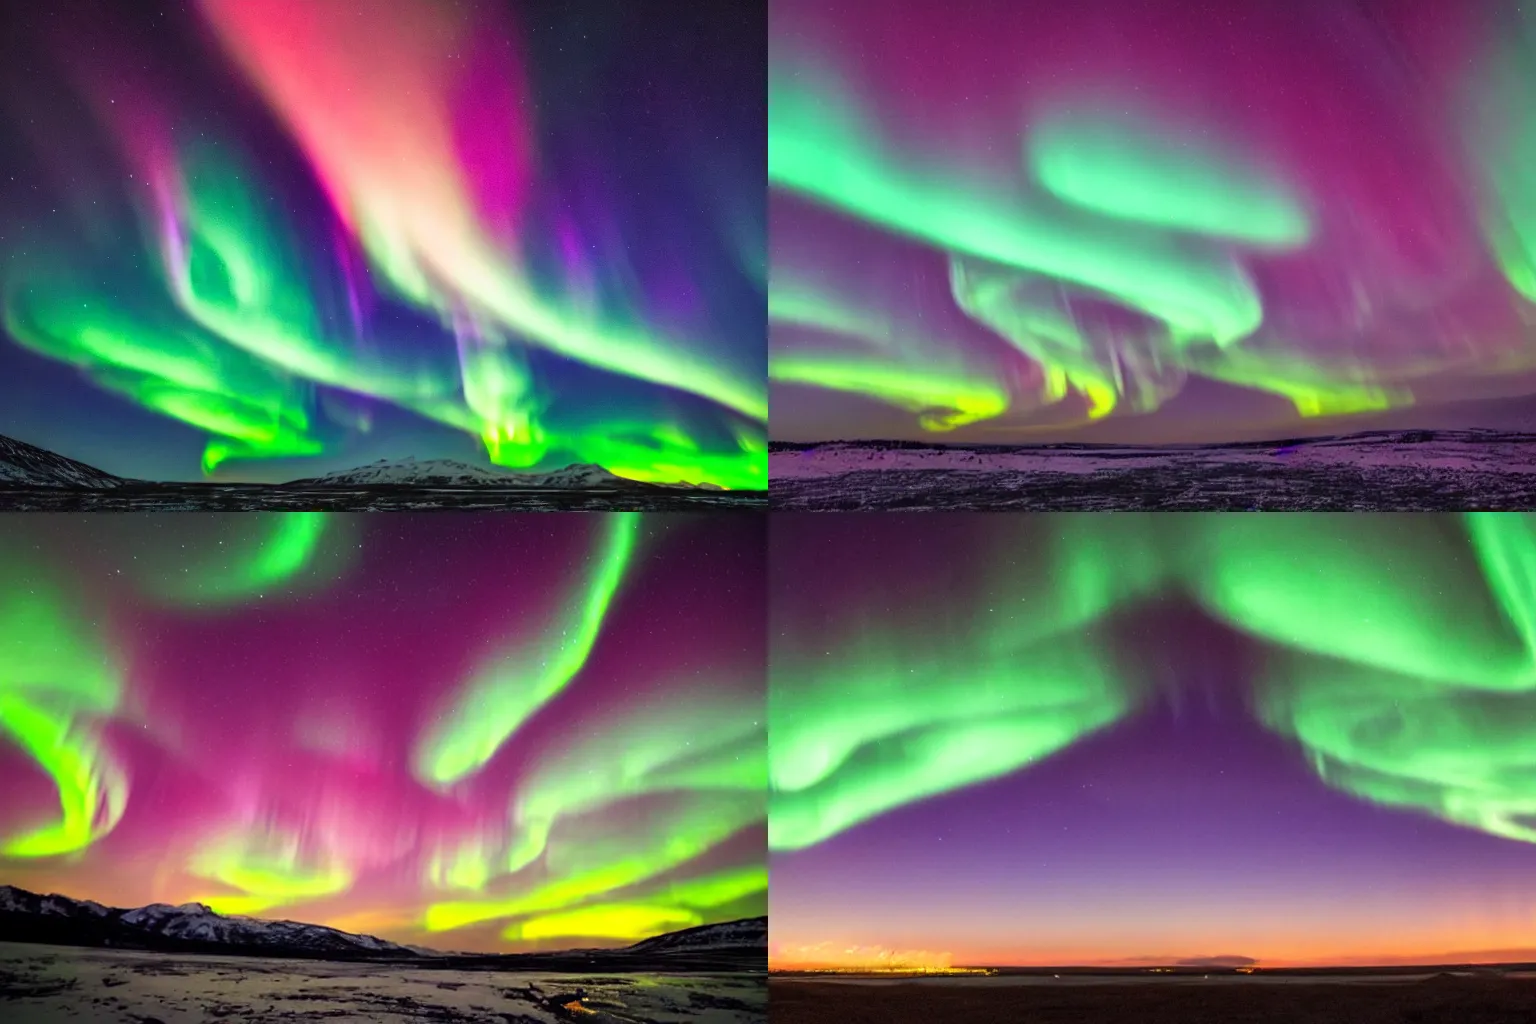 Prompt: an image of the beautiful northern lights in the sky at sunset